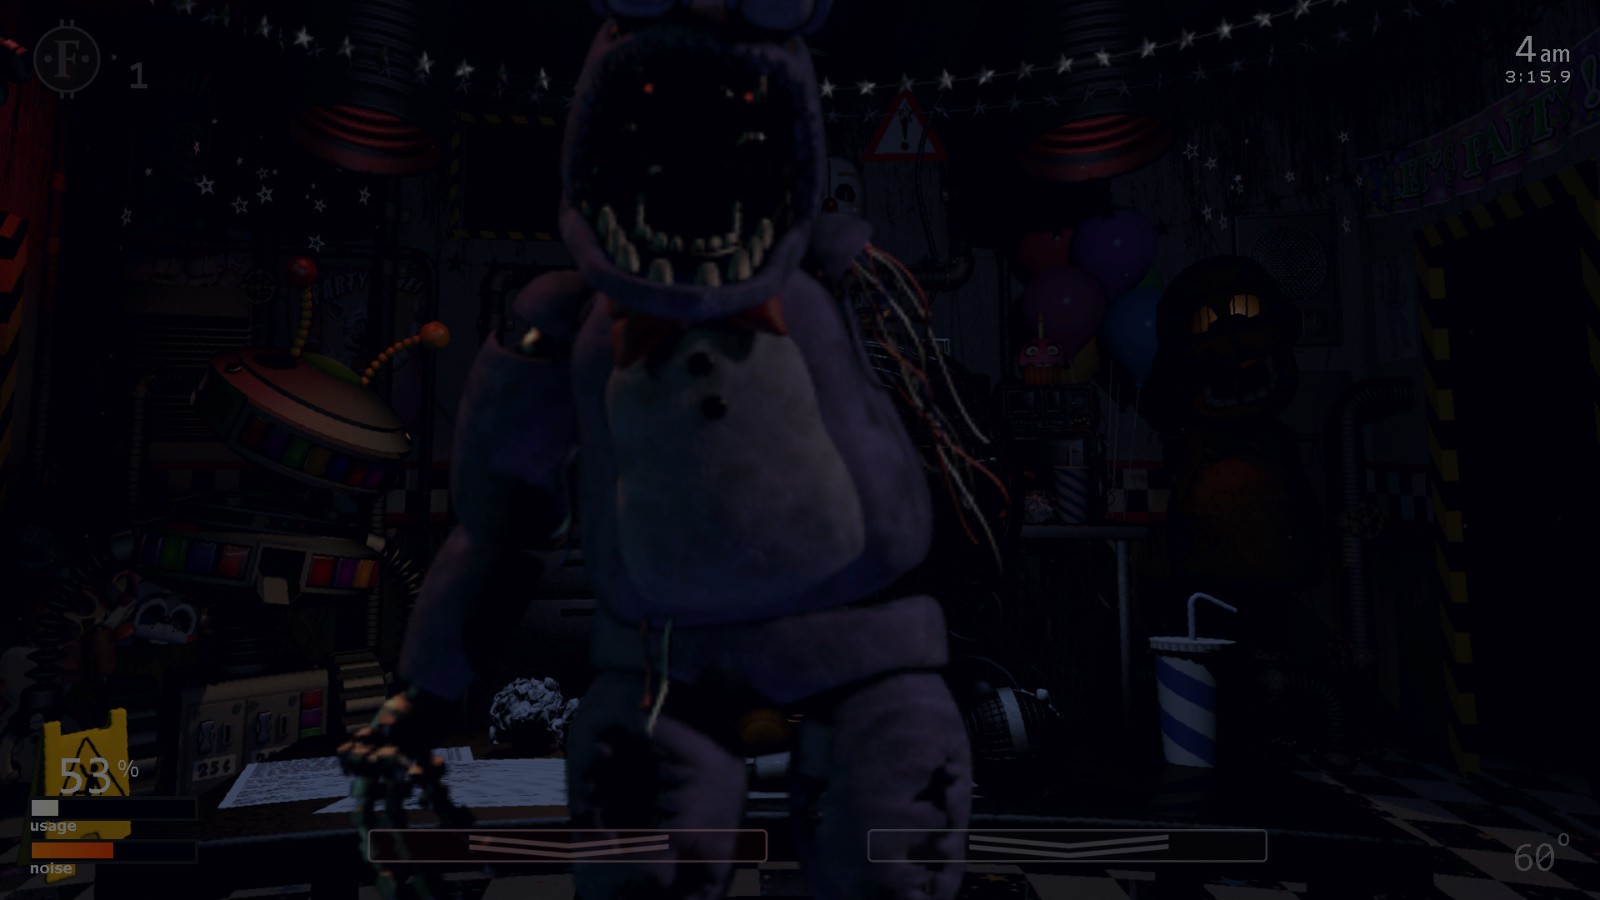 Fnaf 2 Withered Bonnie Camera - HD Wallpaper 